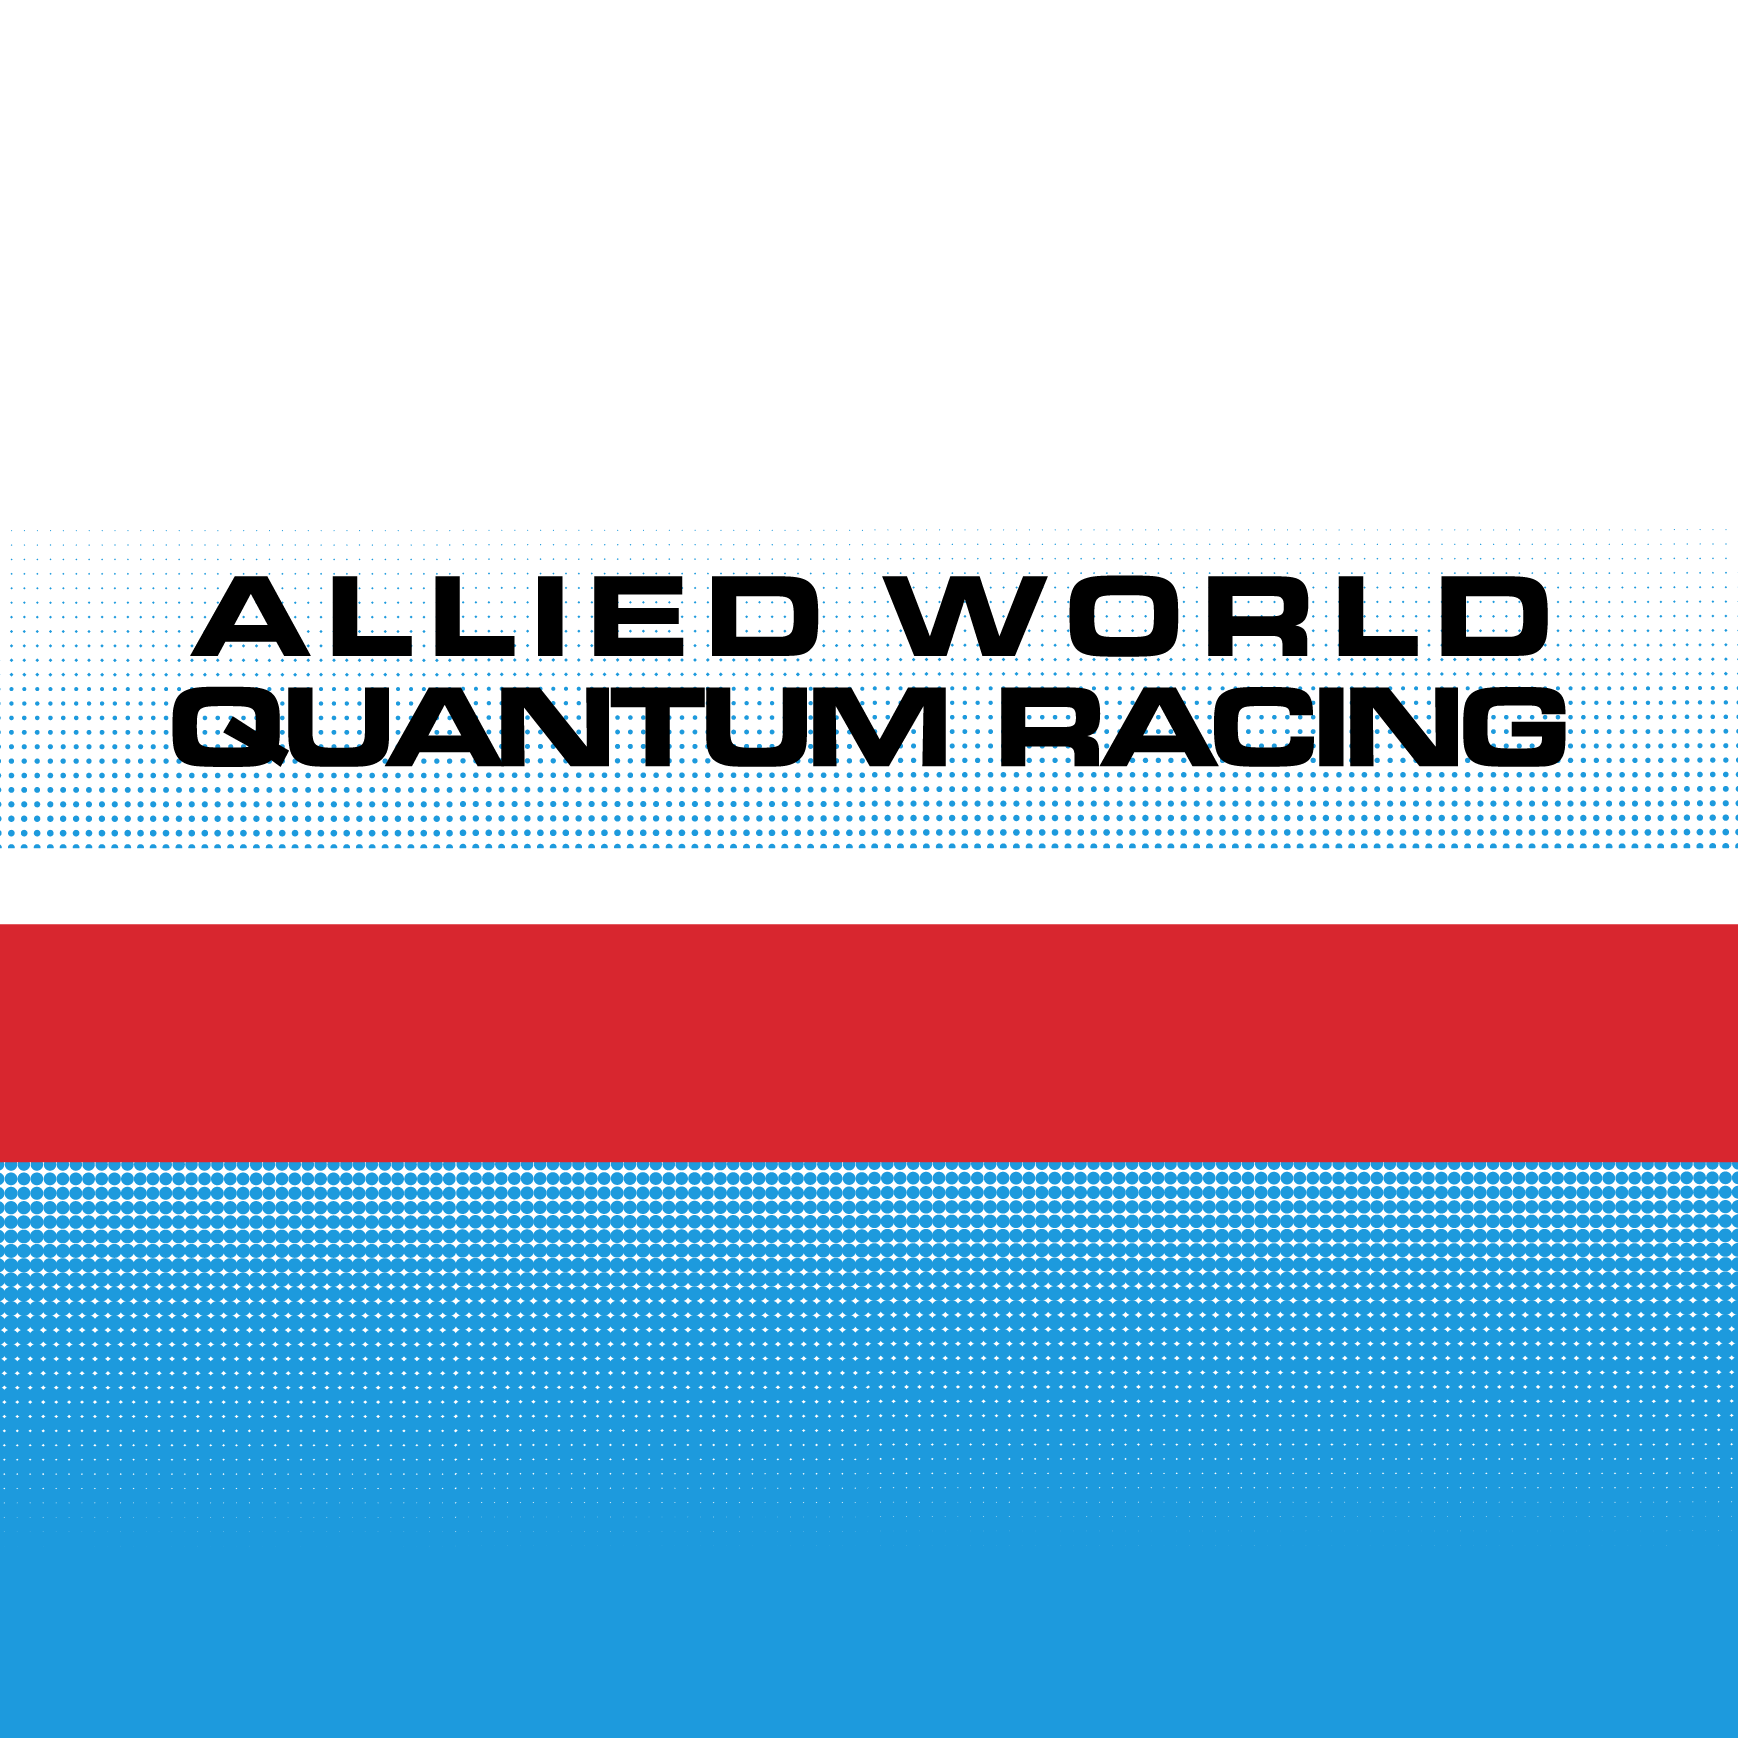 Club Image for ALLIED WORLD QUANTUM RACING